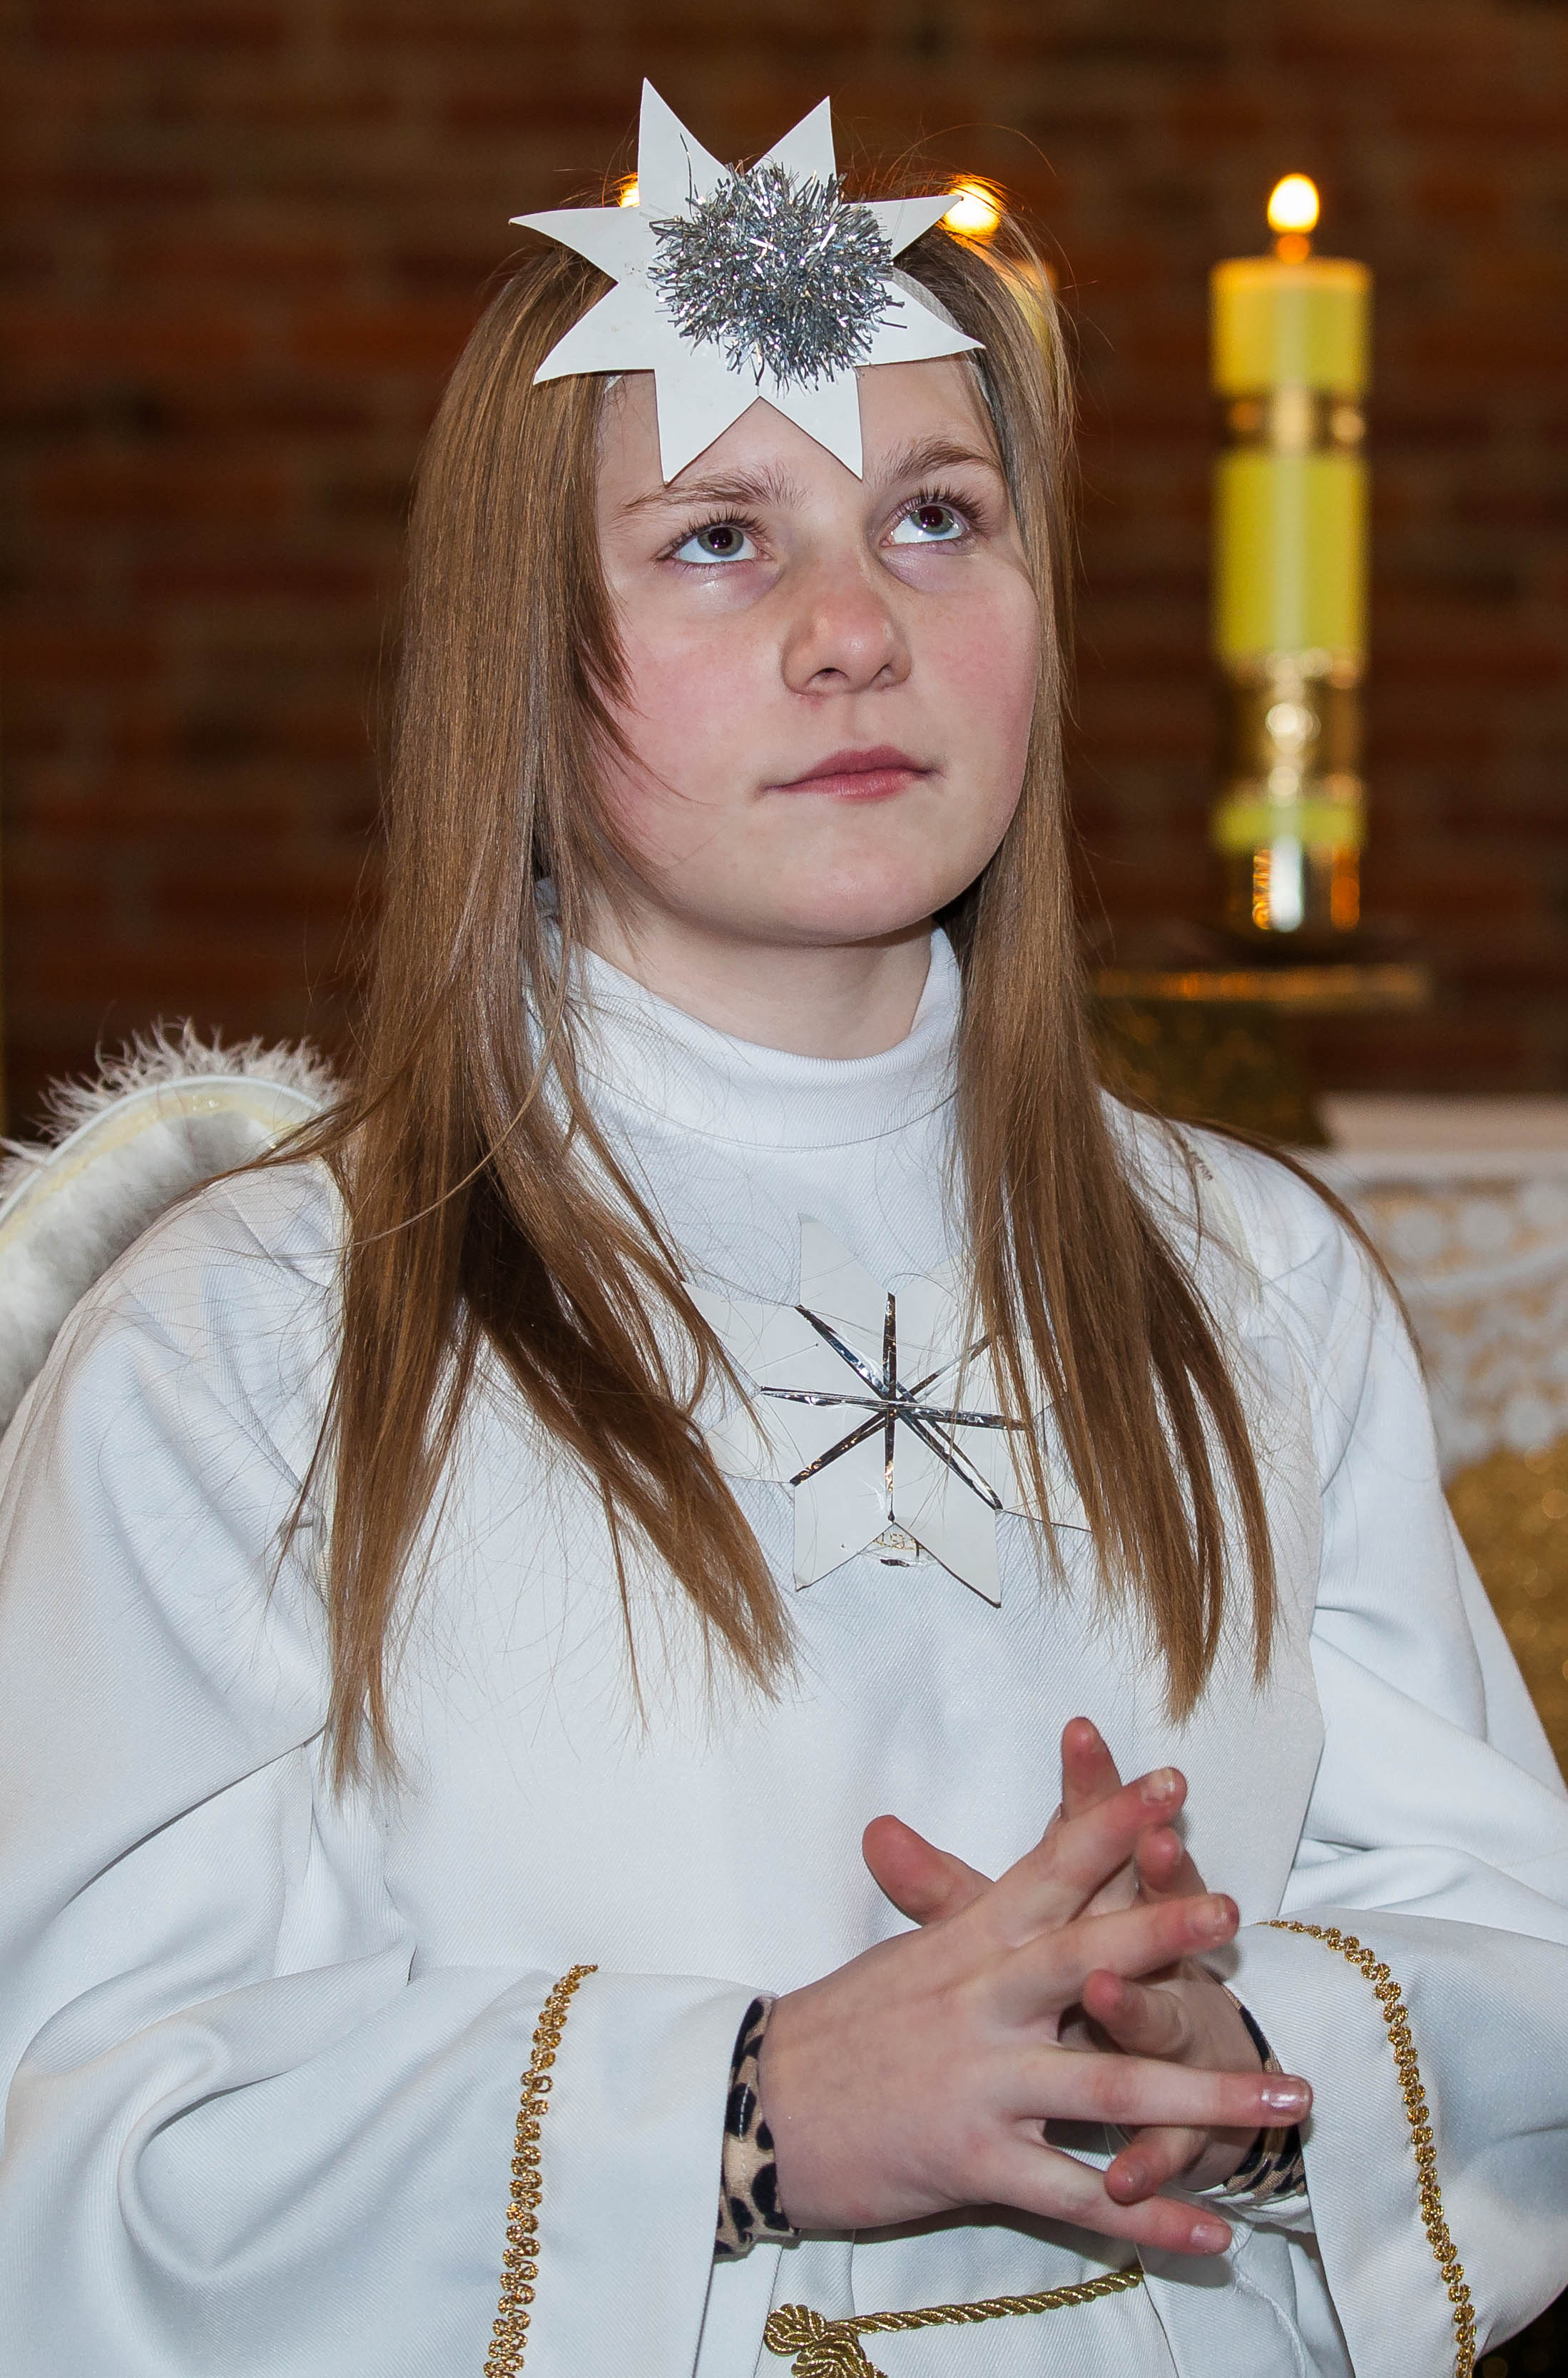 a young Catholic blond girl performing in a play in December 2013, image 1/2